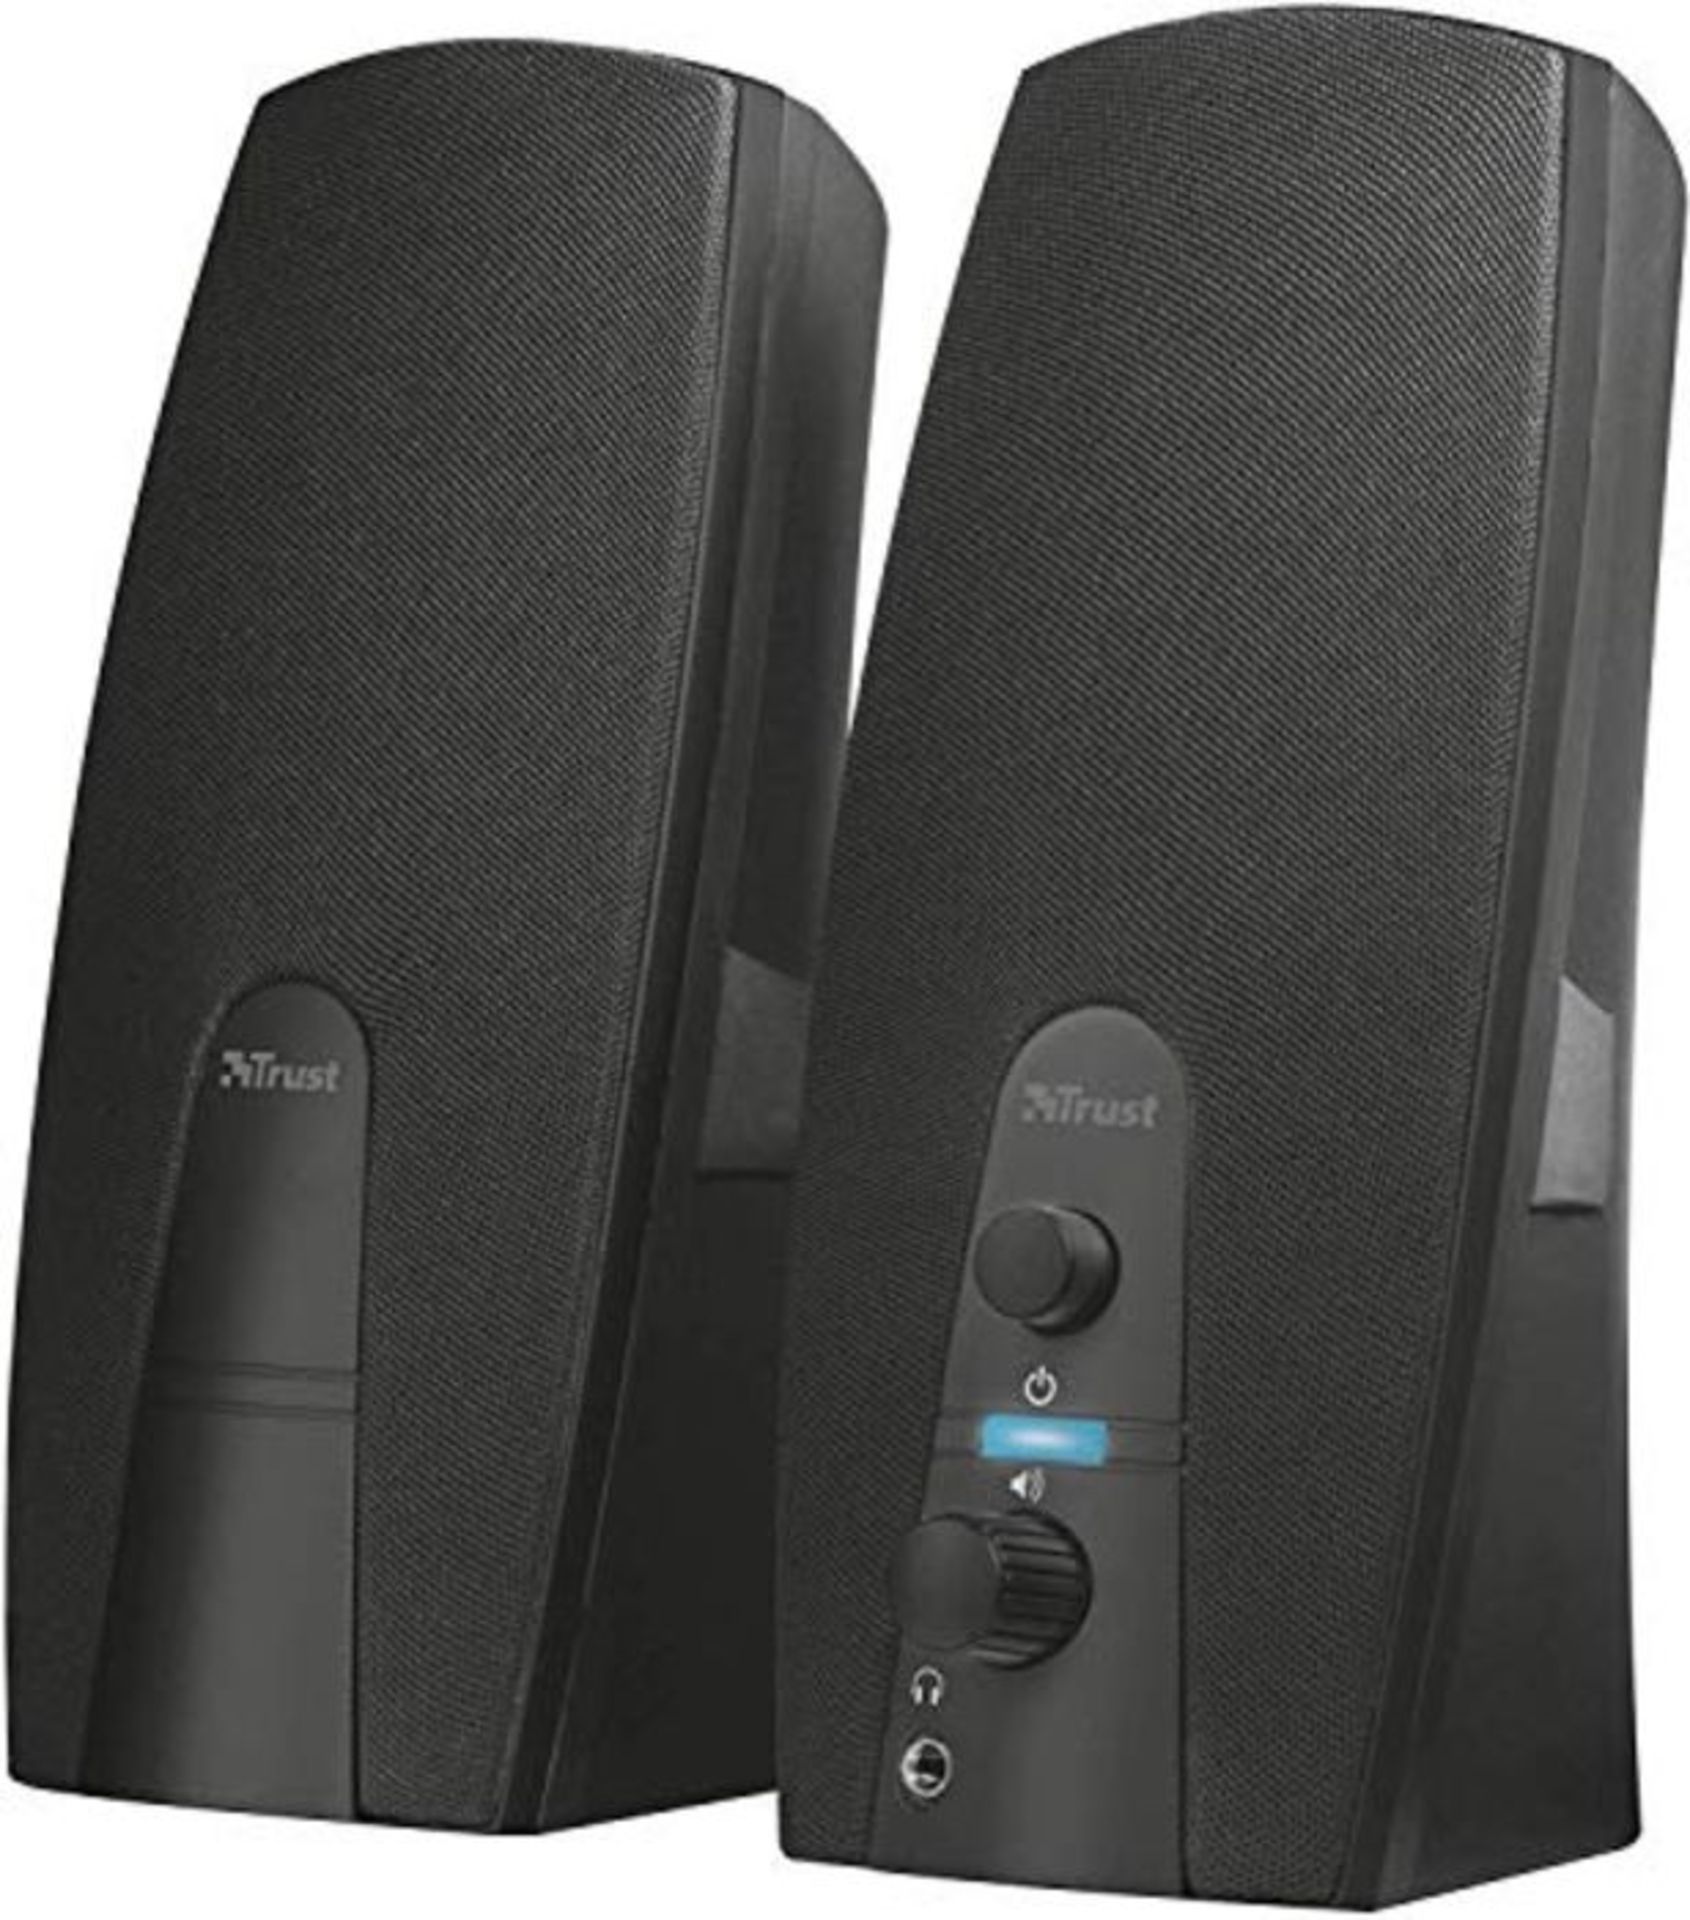 Trust Almo 2.0 PC Speakers for Computer and Laptop, 10 W, USB Powered, Black [Amazon E